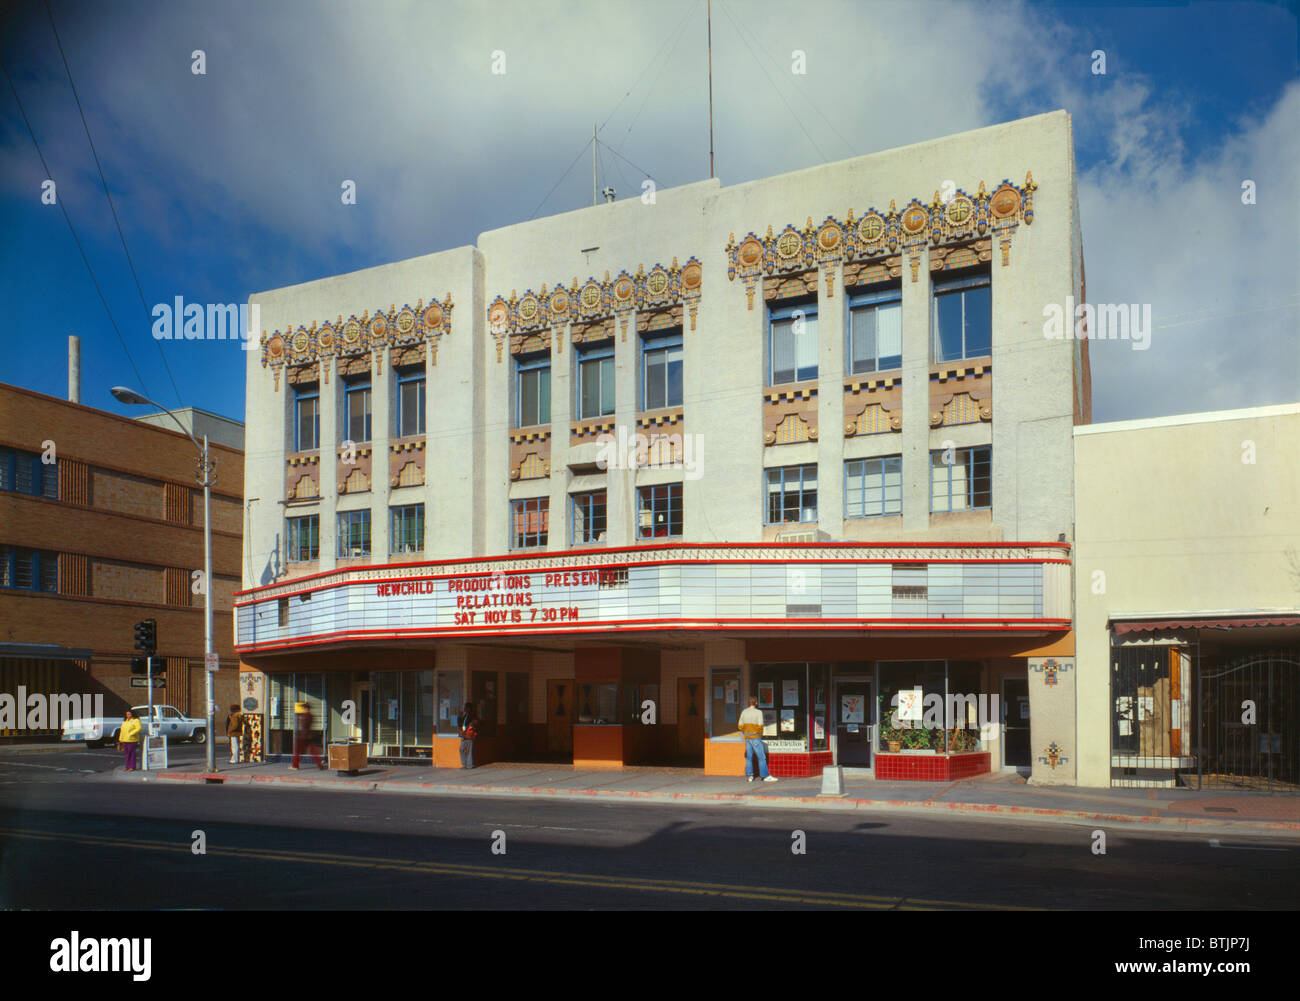 Movie Theaters, The Kimo Theater, marquee reads: 'Newchild Productions presents Relations Sat Nov 15 7:30 PM', photograph by Walter Smalling, 421 Central Northest, Albuquerque, New Mexico, circa 1980s. Stock Photo